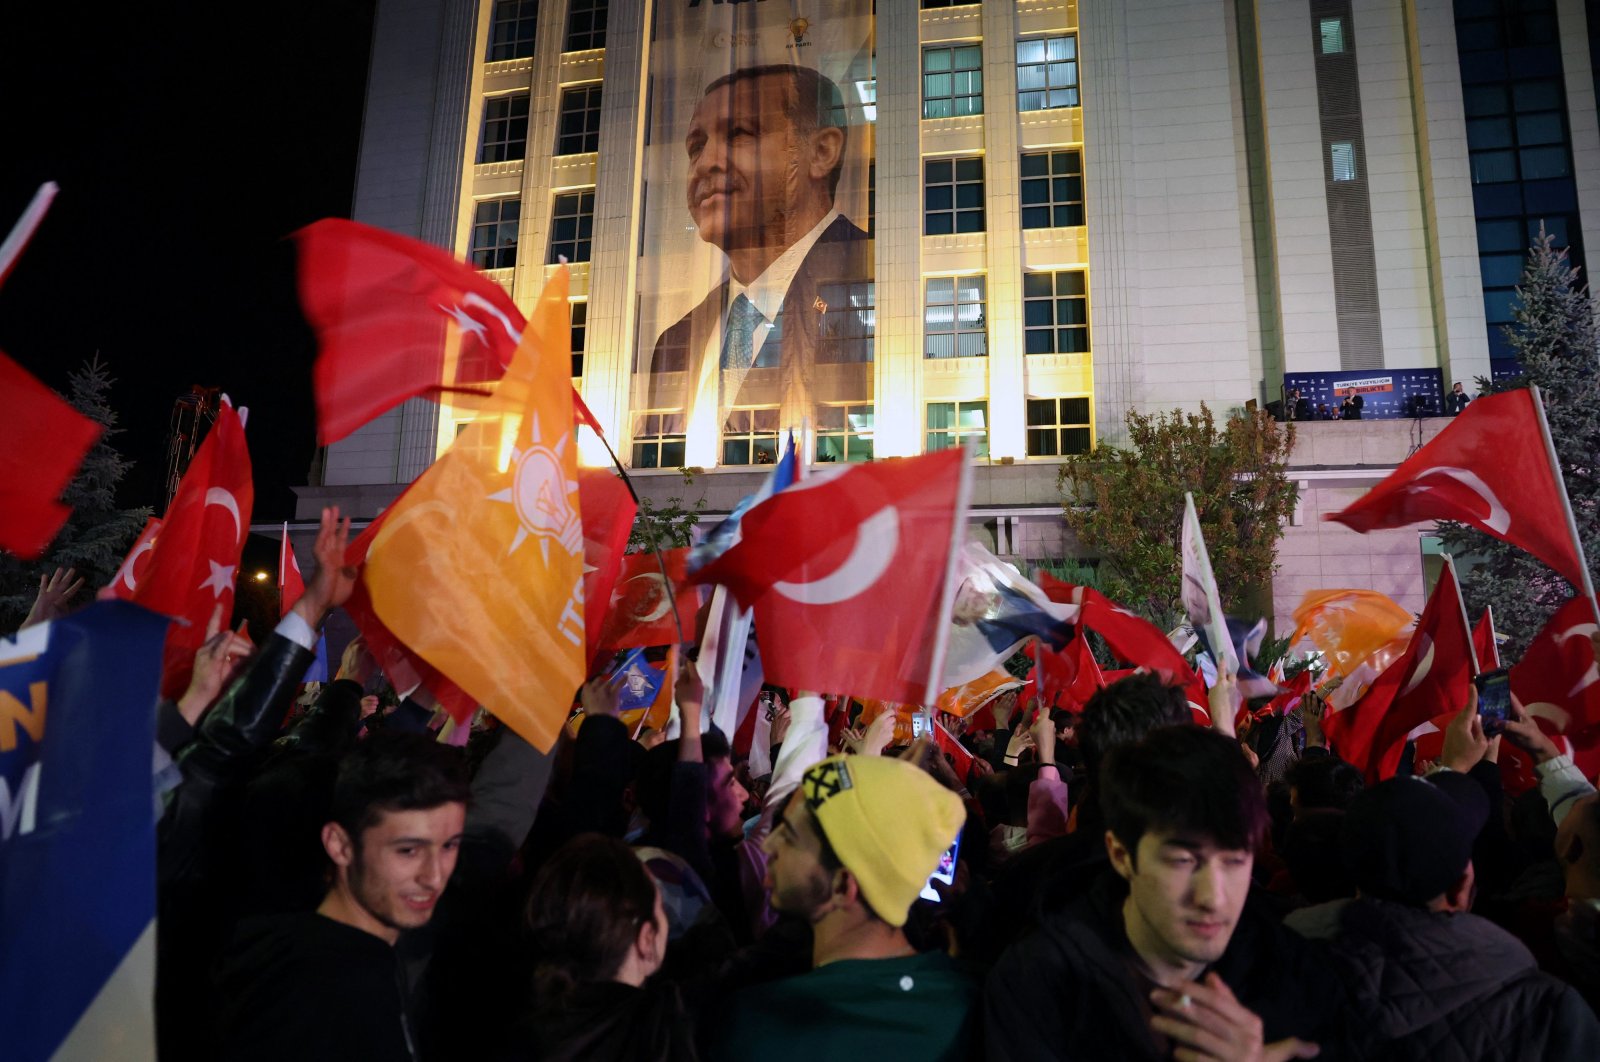 Supporters of President Recep Tayyip Erdoğan wave flags outside the Justice and Development Party (AK Party) headquarters, in the capital Ankara, Türkiye, May 15, 2023. (AFP Photo)